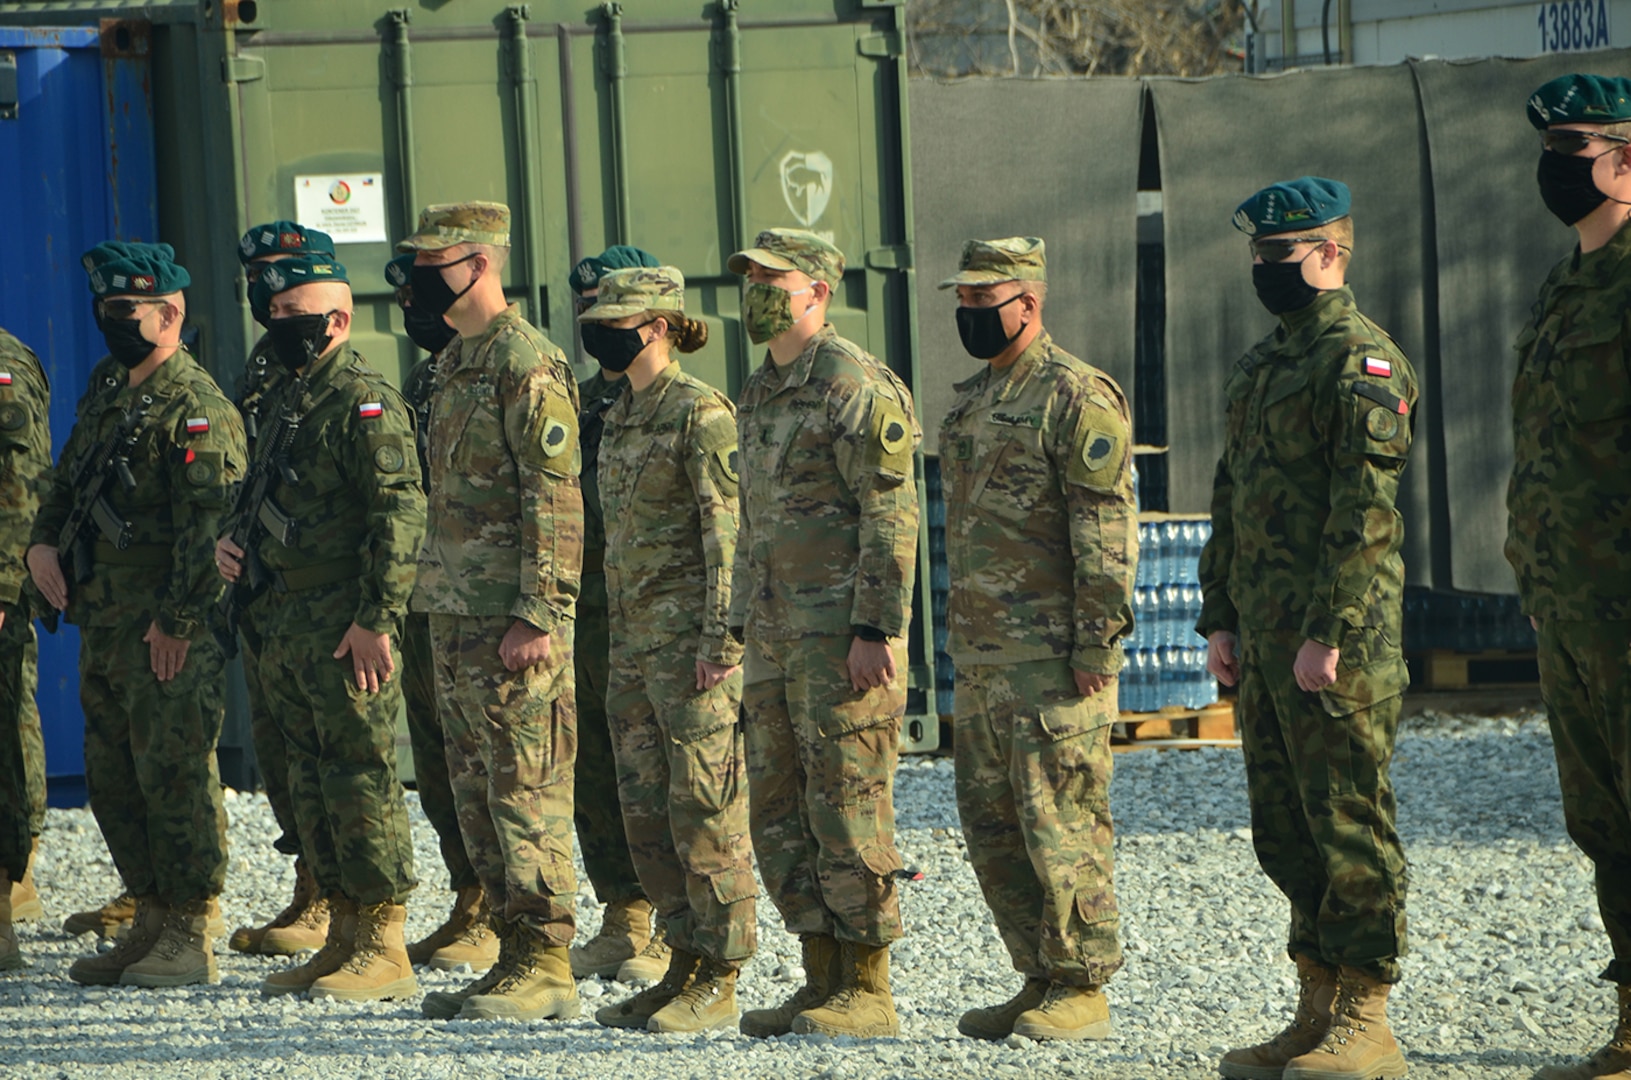 The Illinois Army National Guard Bilateral Embedded Support Team (BEST) A25 stand alongside the Polish military contingent during the ILARNG BEST decommissioning ceremony at Bagram Airfield, Afghanistan. Soldiers deployed with BEST A25 returned home Dec. 24.